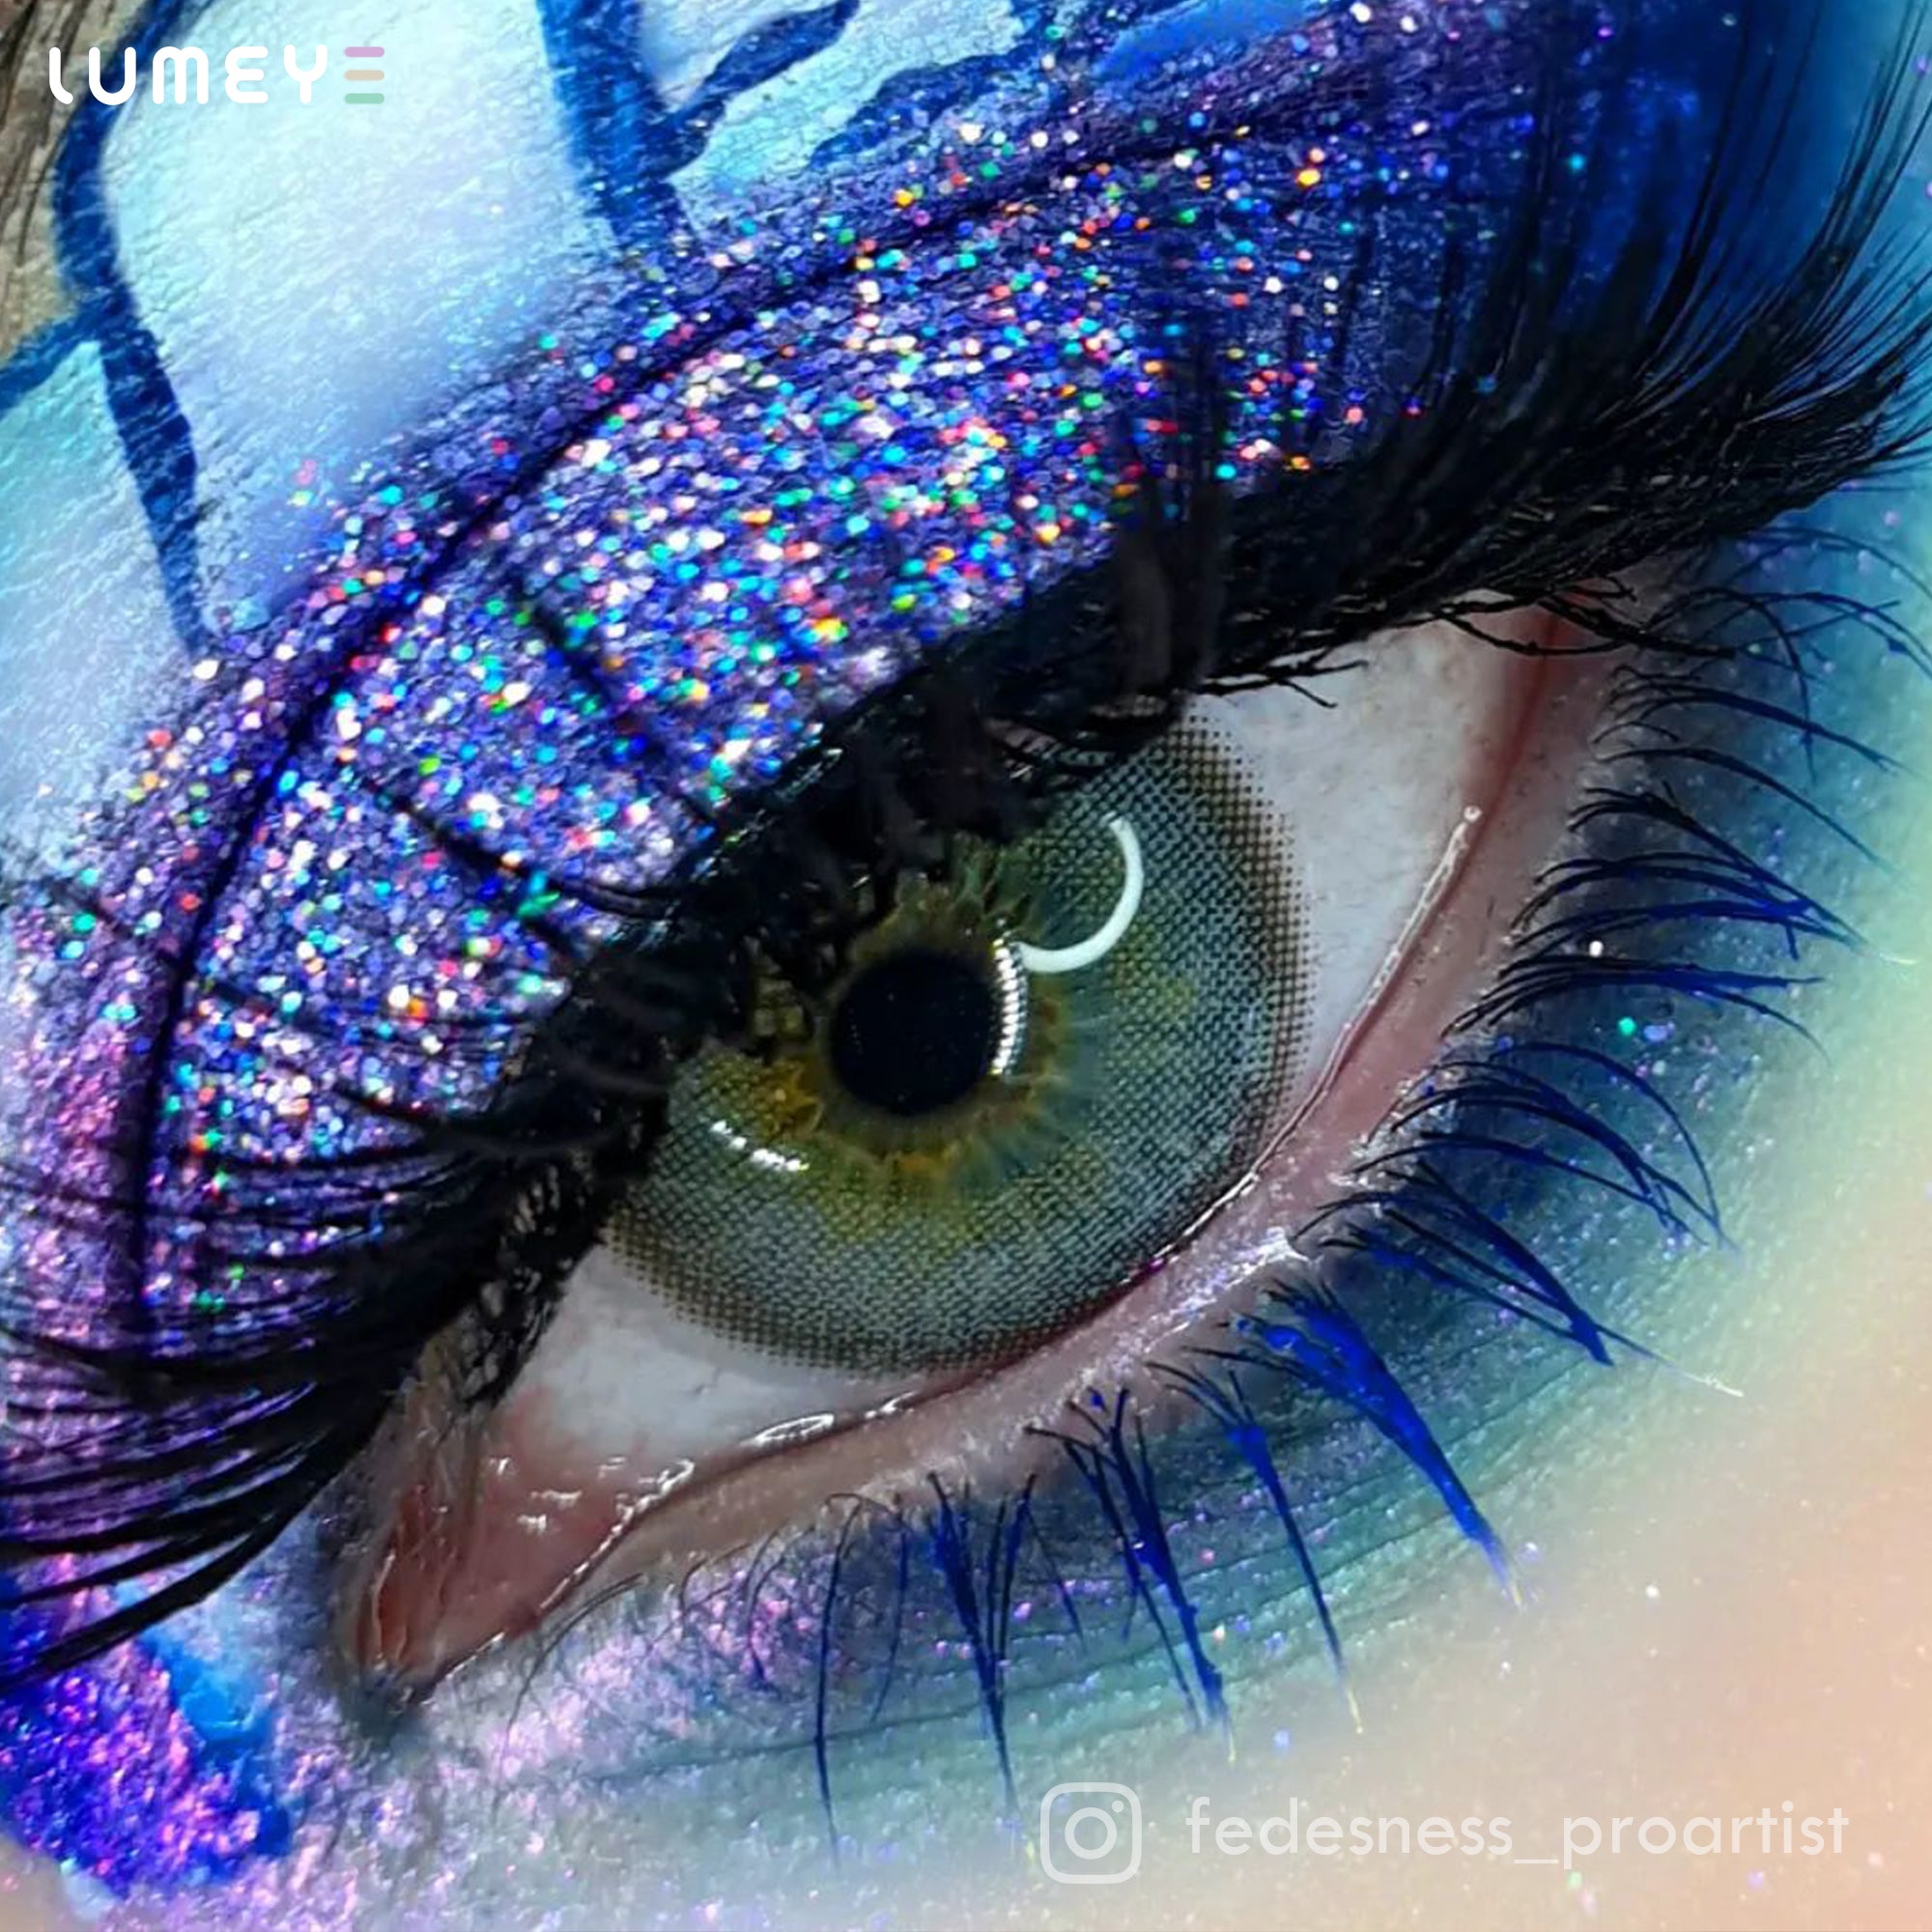 Best COLORED CONTACTS - LUMEYE Elegant Russian Blue Colored Contact Lenses - LUMEYE